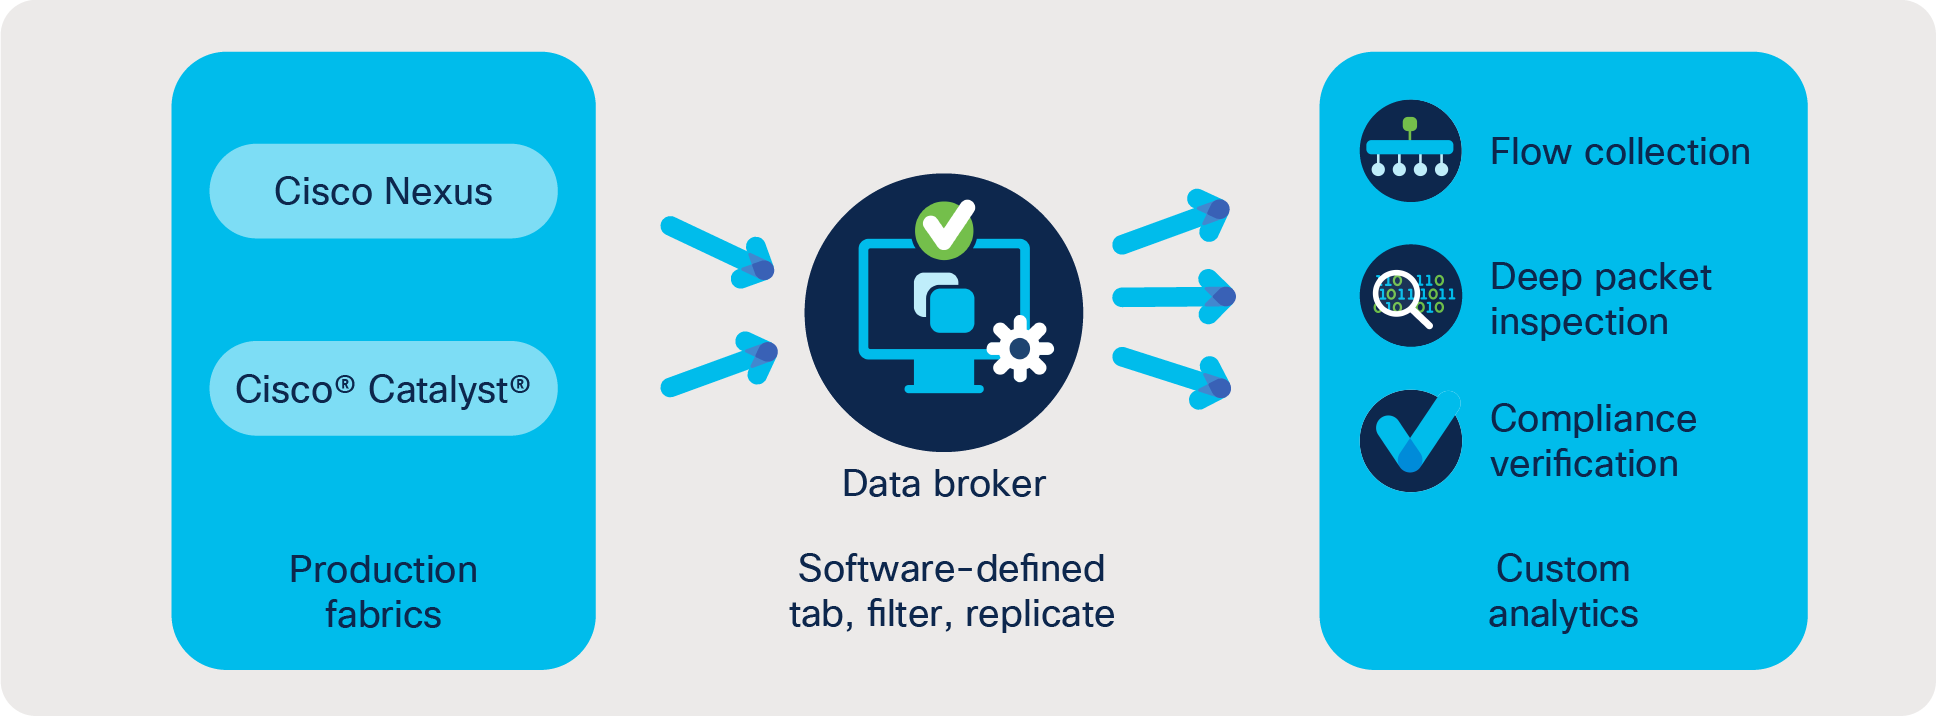 Cisco Nexus Dashboard Data Broker enables NetOps to programmatically manage aggregating, filtering, and forwarding complete flows to custom analytics tools